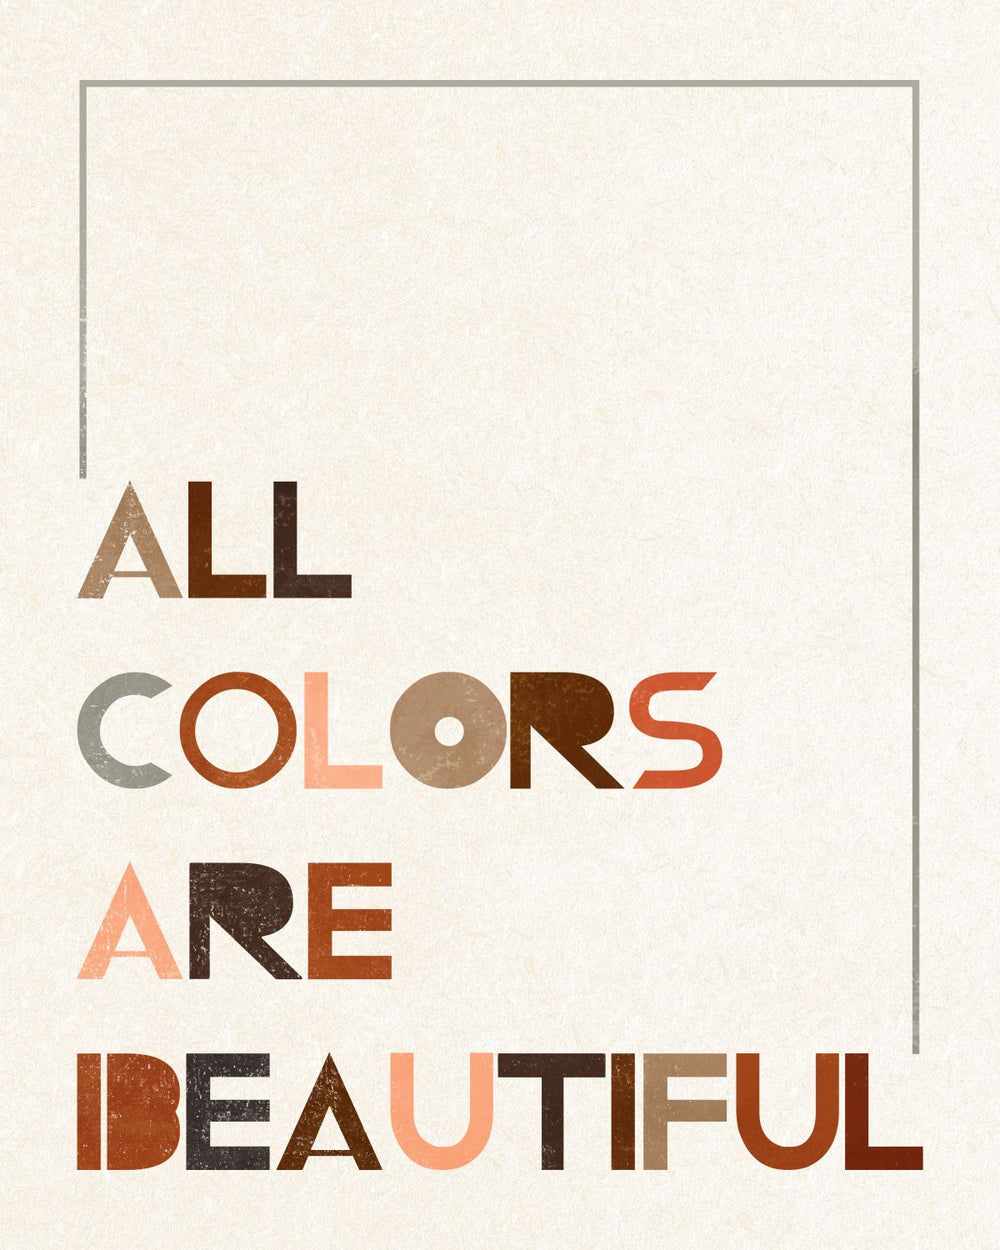 All Colors Are Beautiful